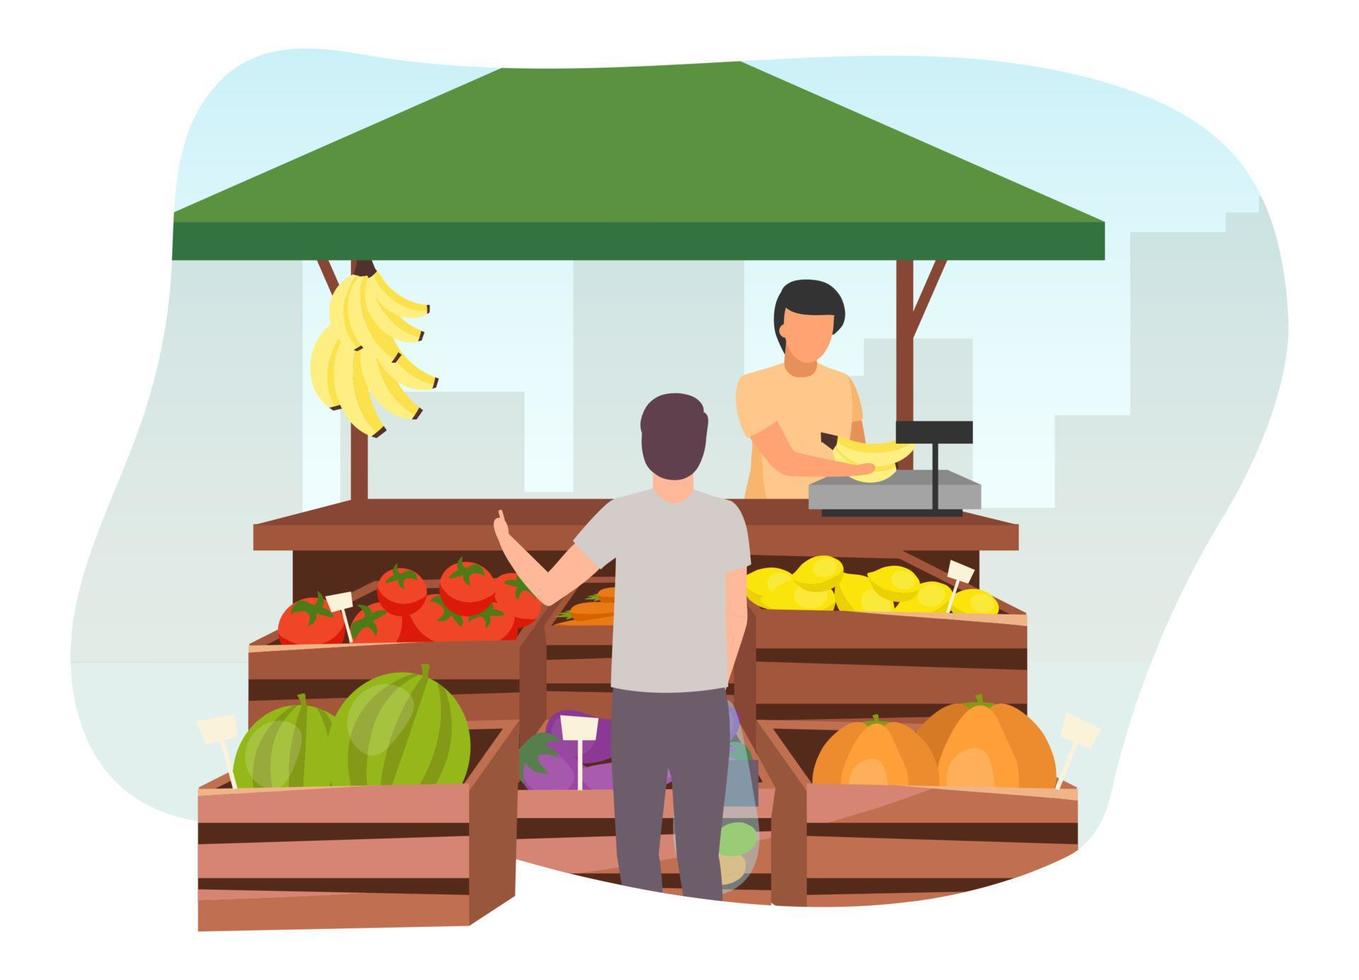 Fruits and vegetables market stall with seller flat illustration. Man buying farm products, eco and organic food at trade tent with wooden crates. Summer market stand, grocery outdoor street shop vector